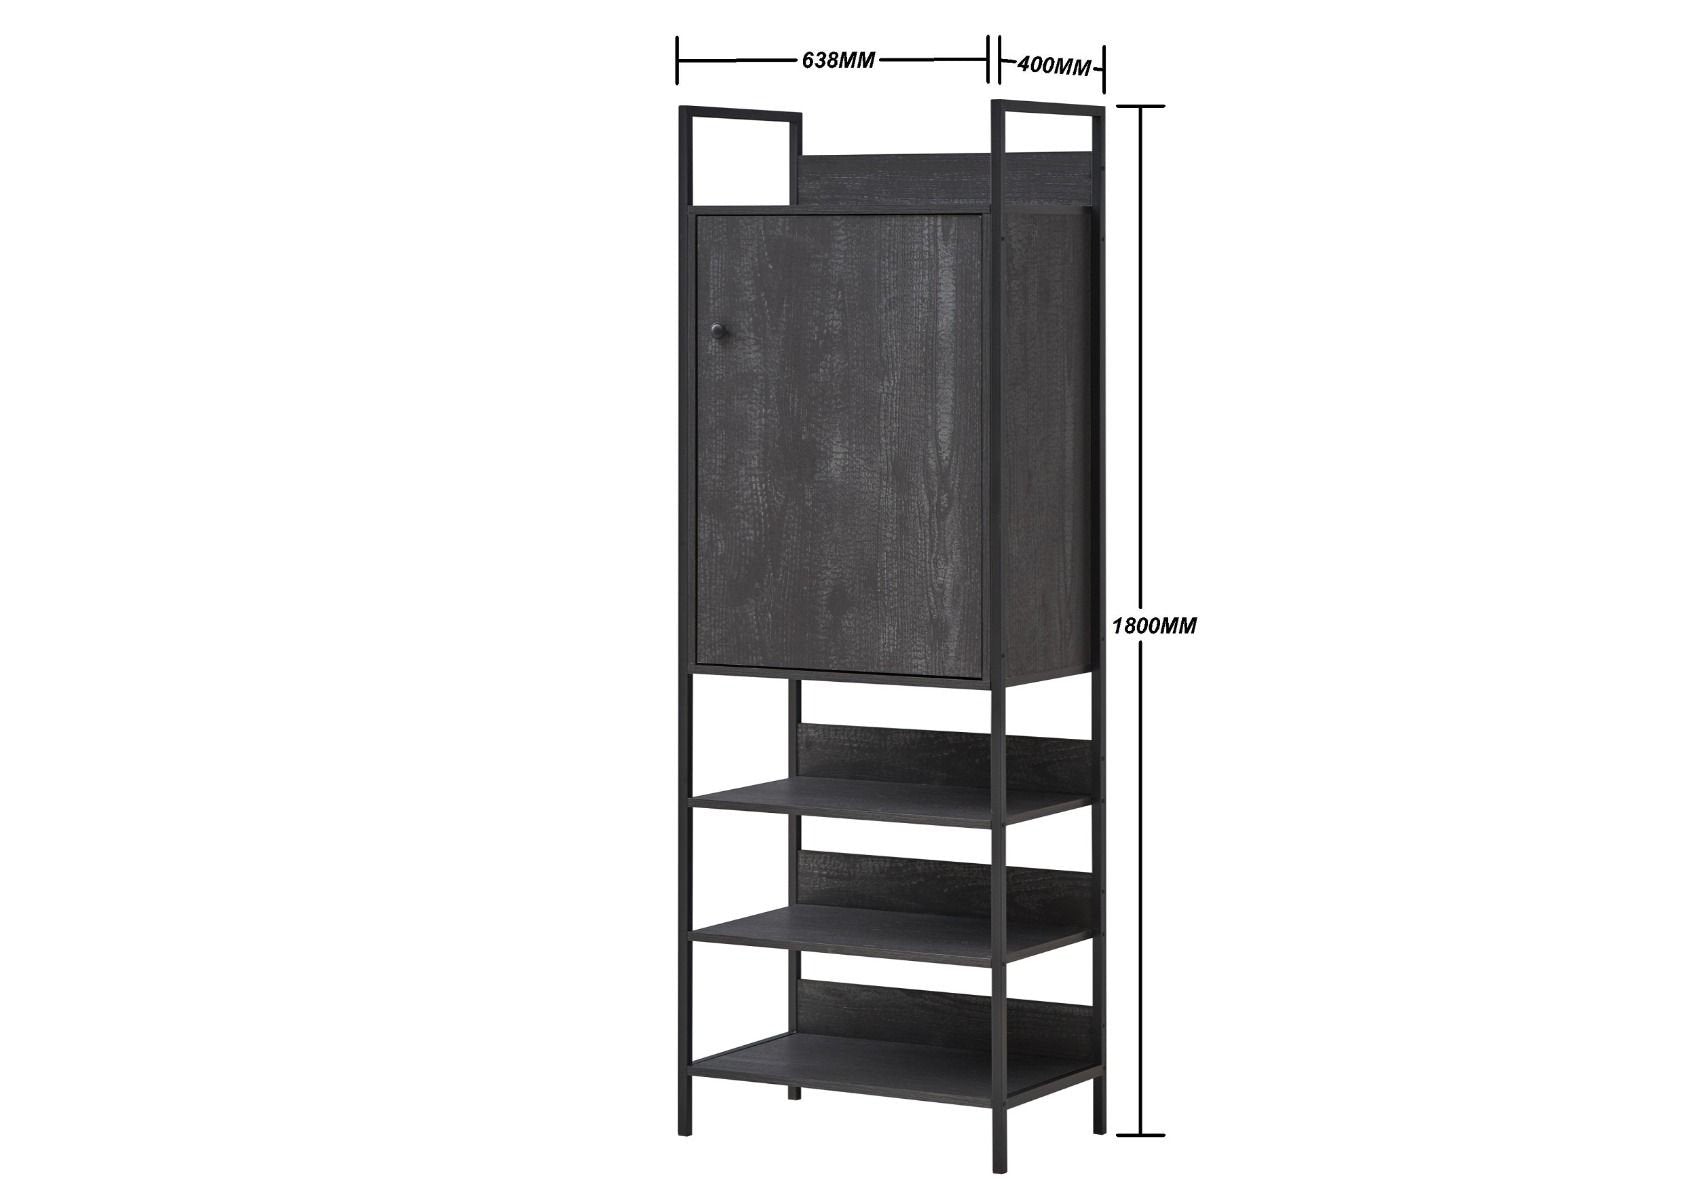 Lynx Clothing Rack with Shelves